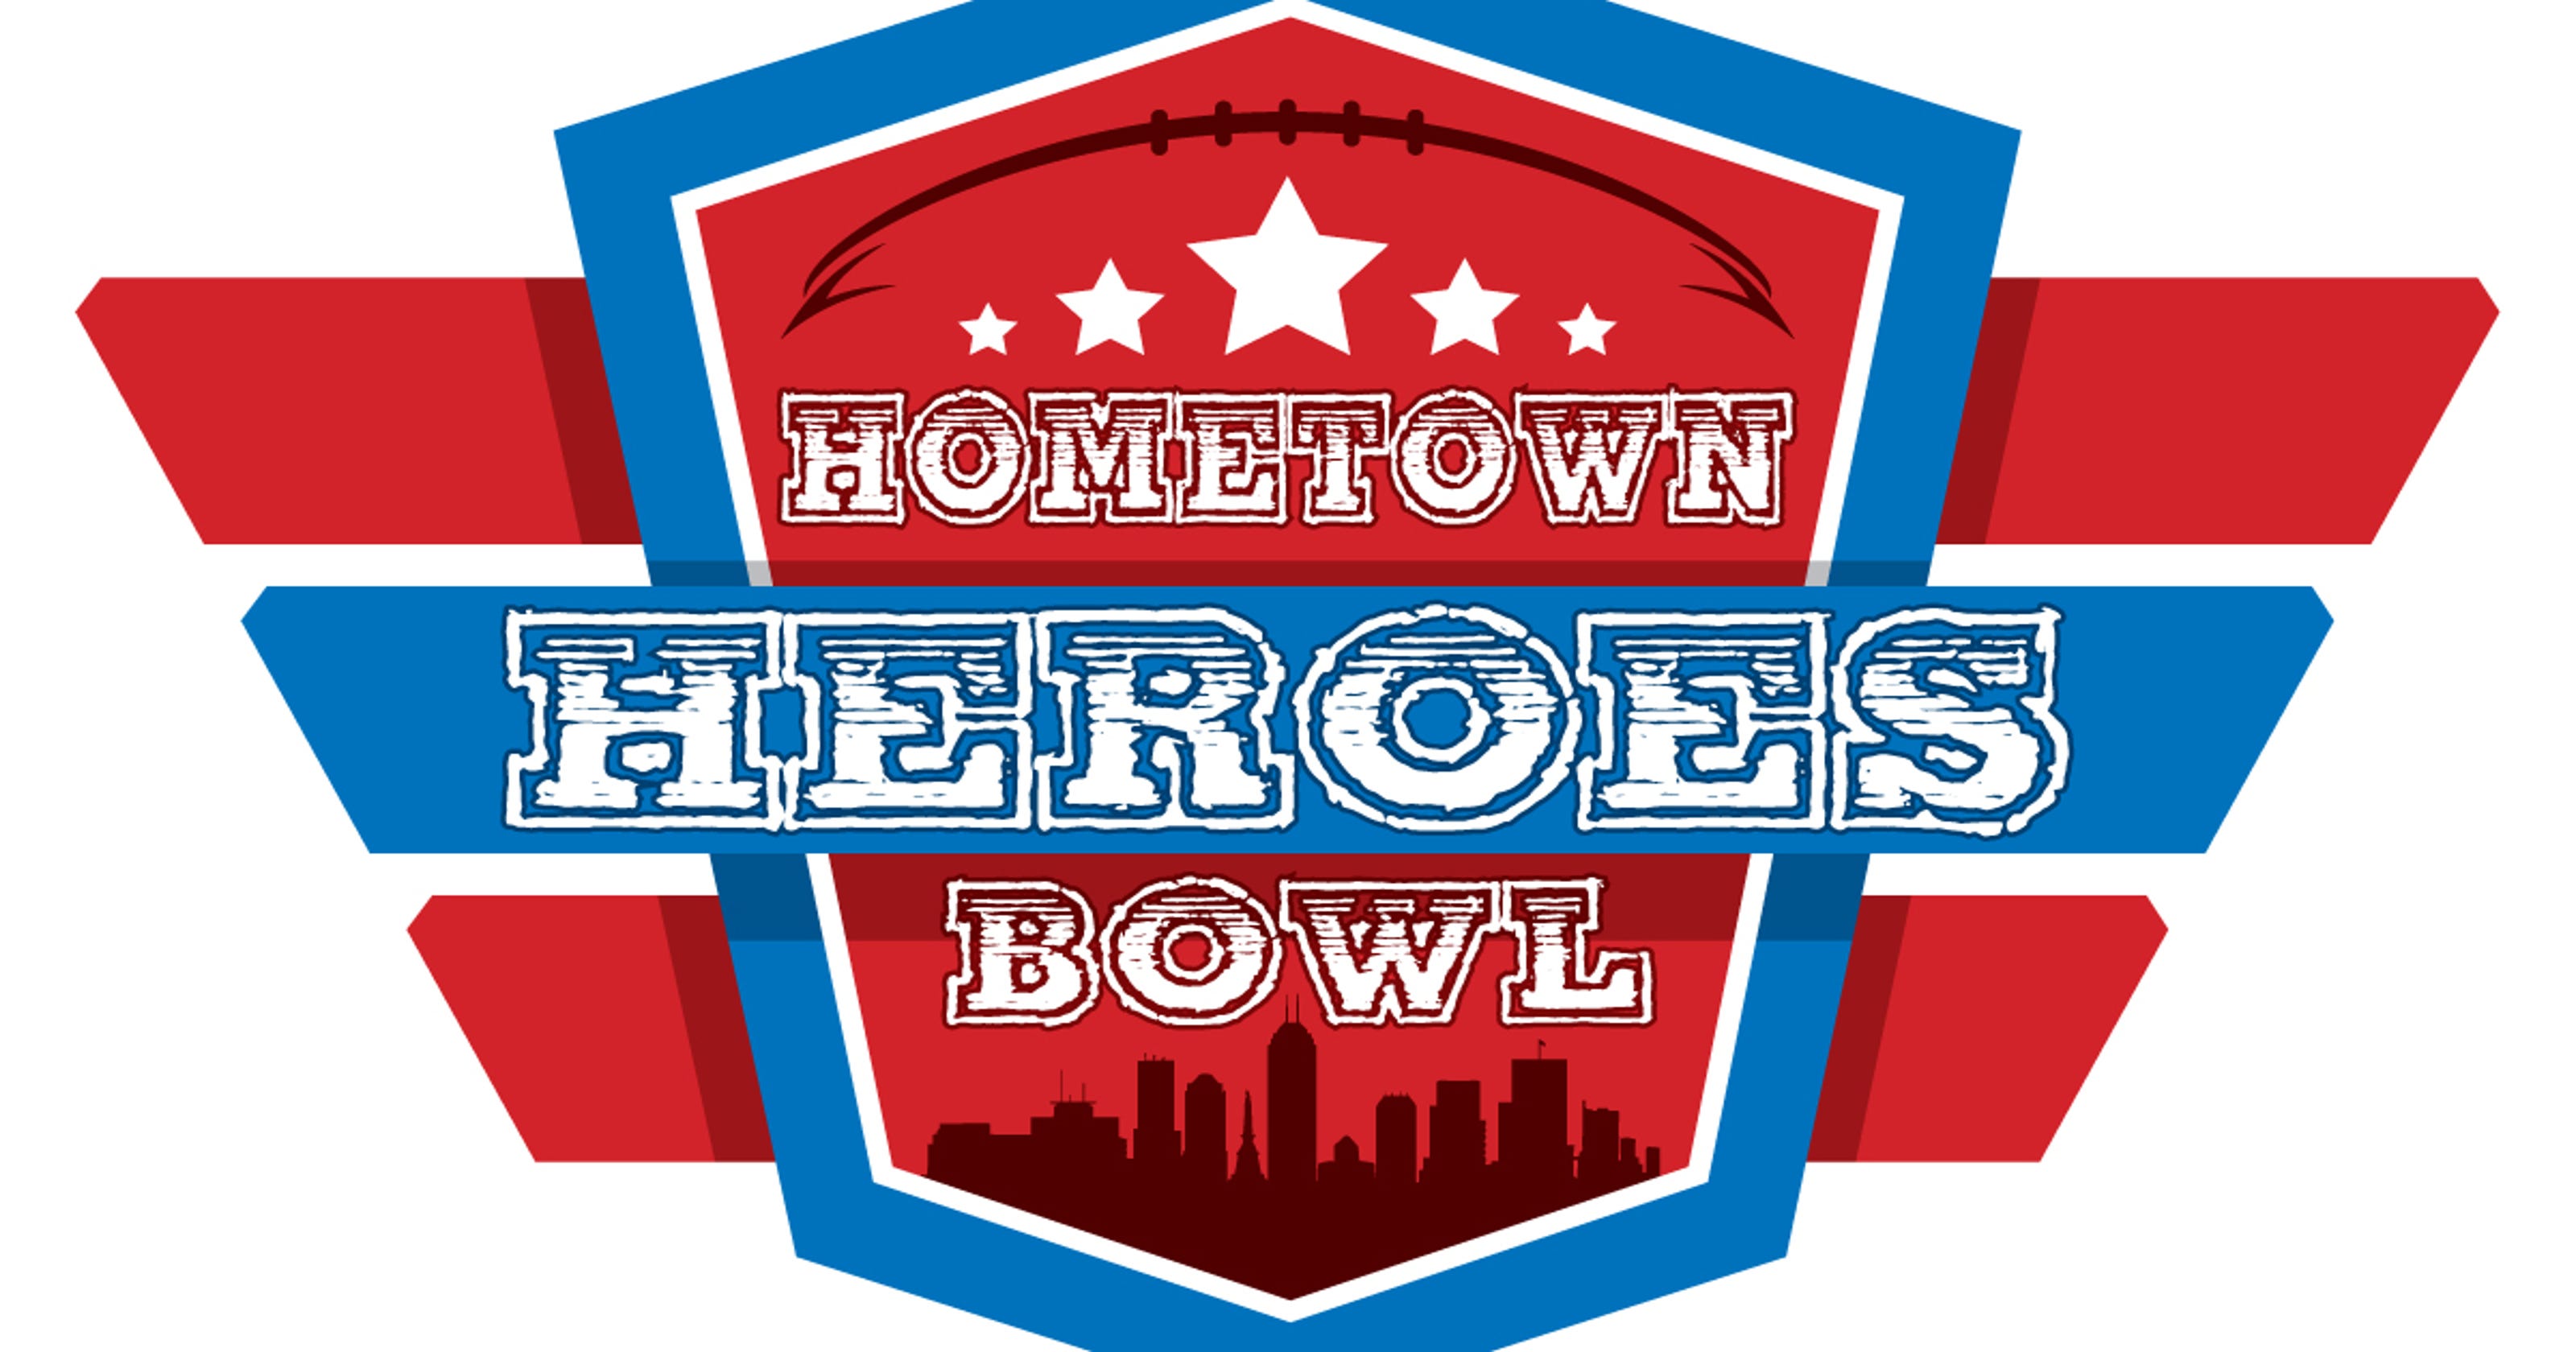 'Hometown Heroes Bowl' at Lucas Oil to feature games with Kokomo and